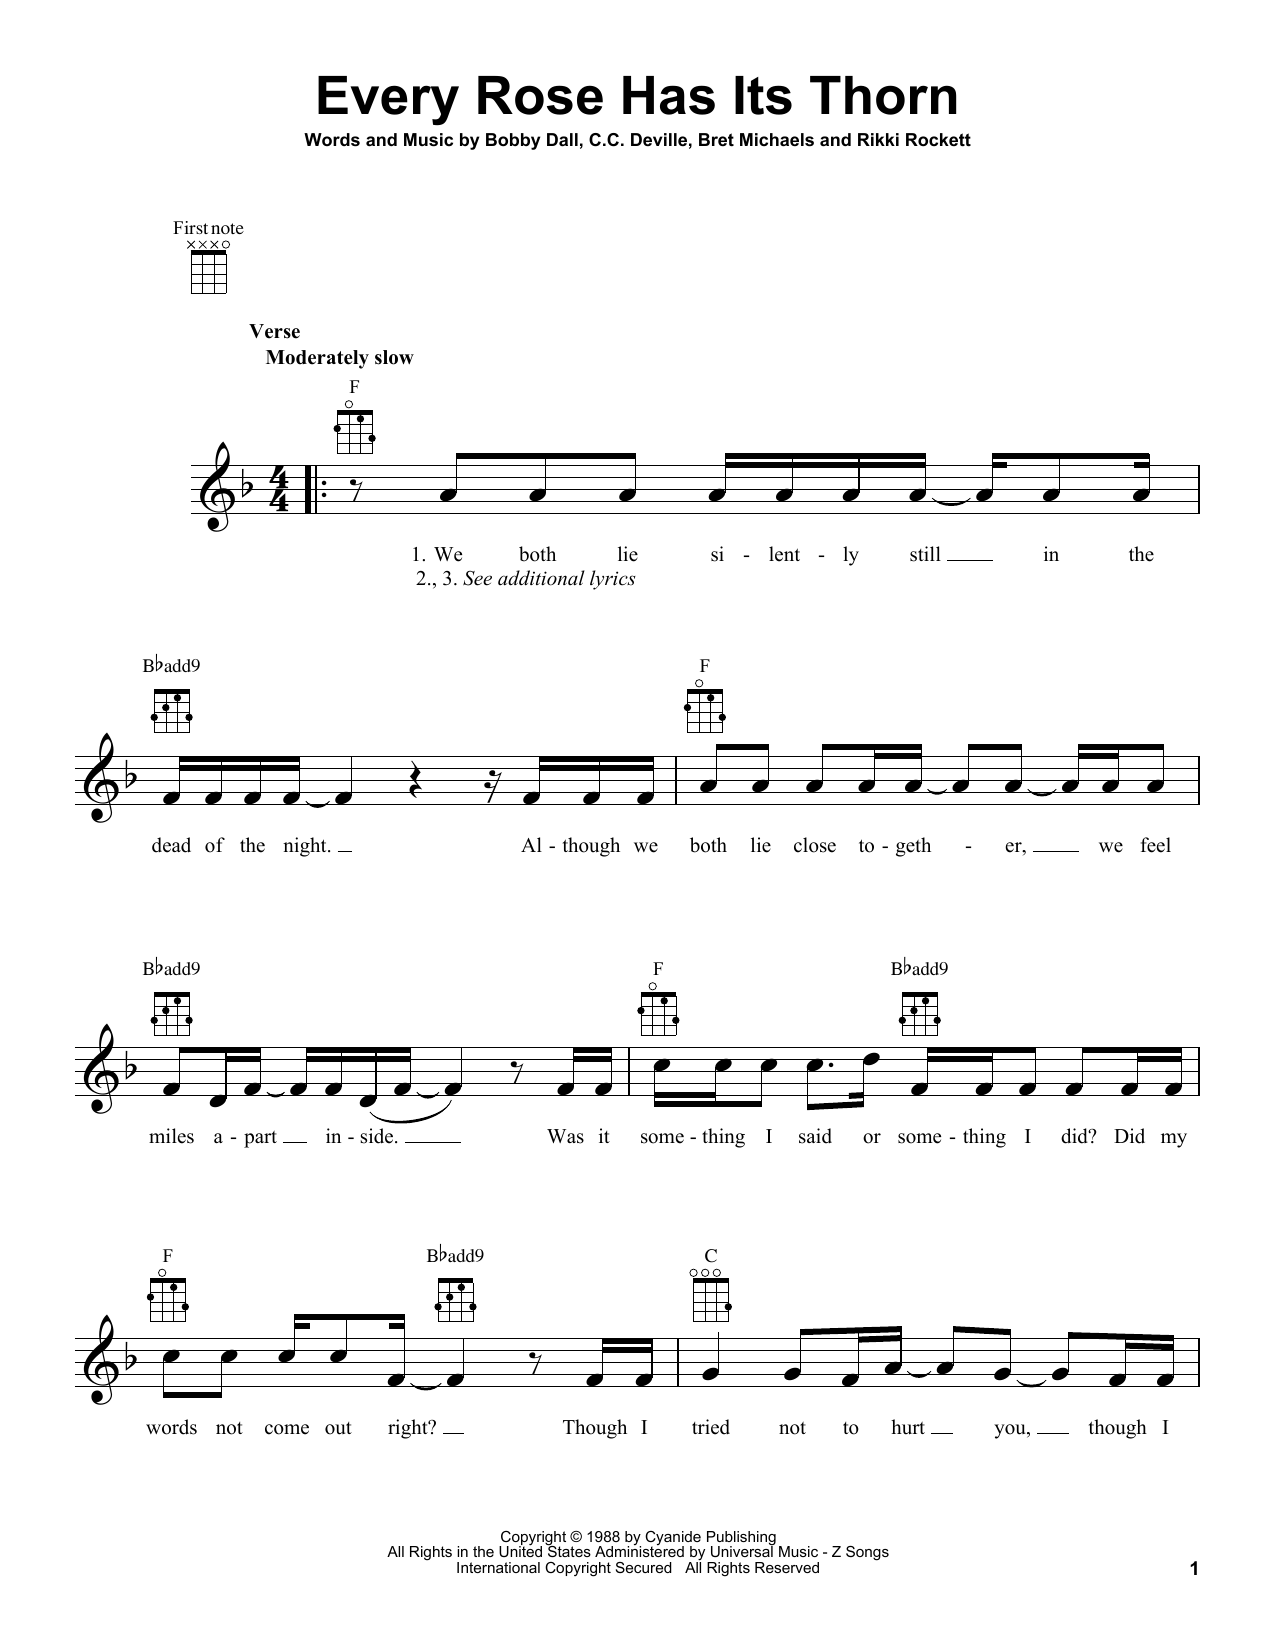 Download Poison Every Rose Has Its Thorn Sheet Music